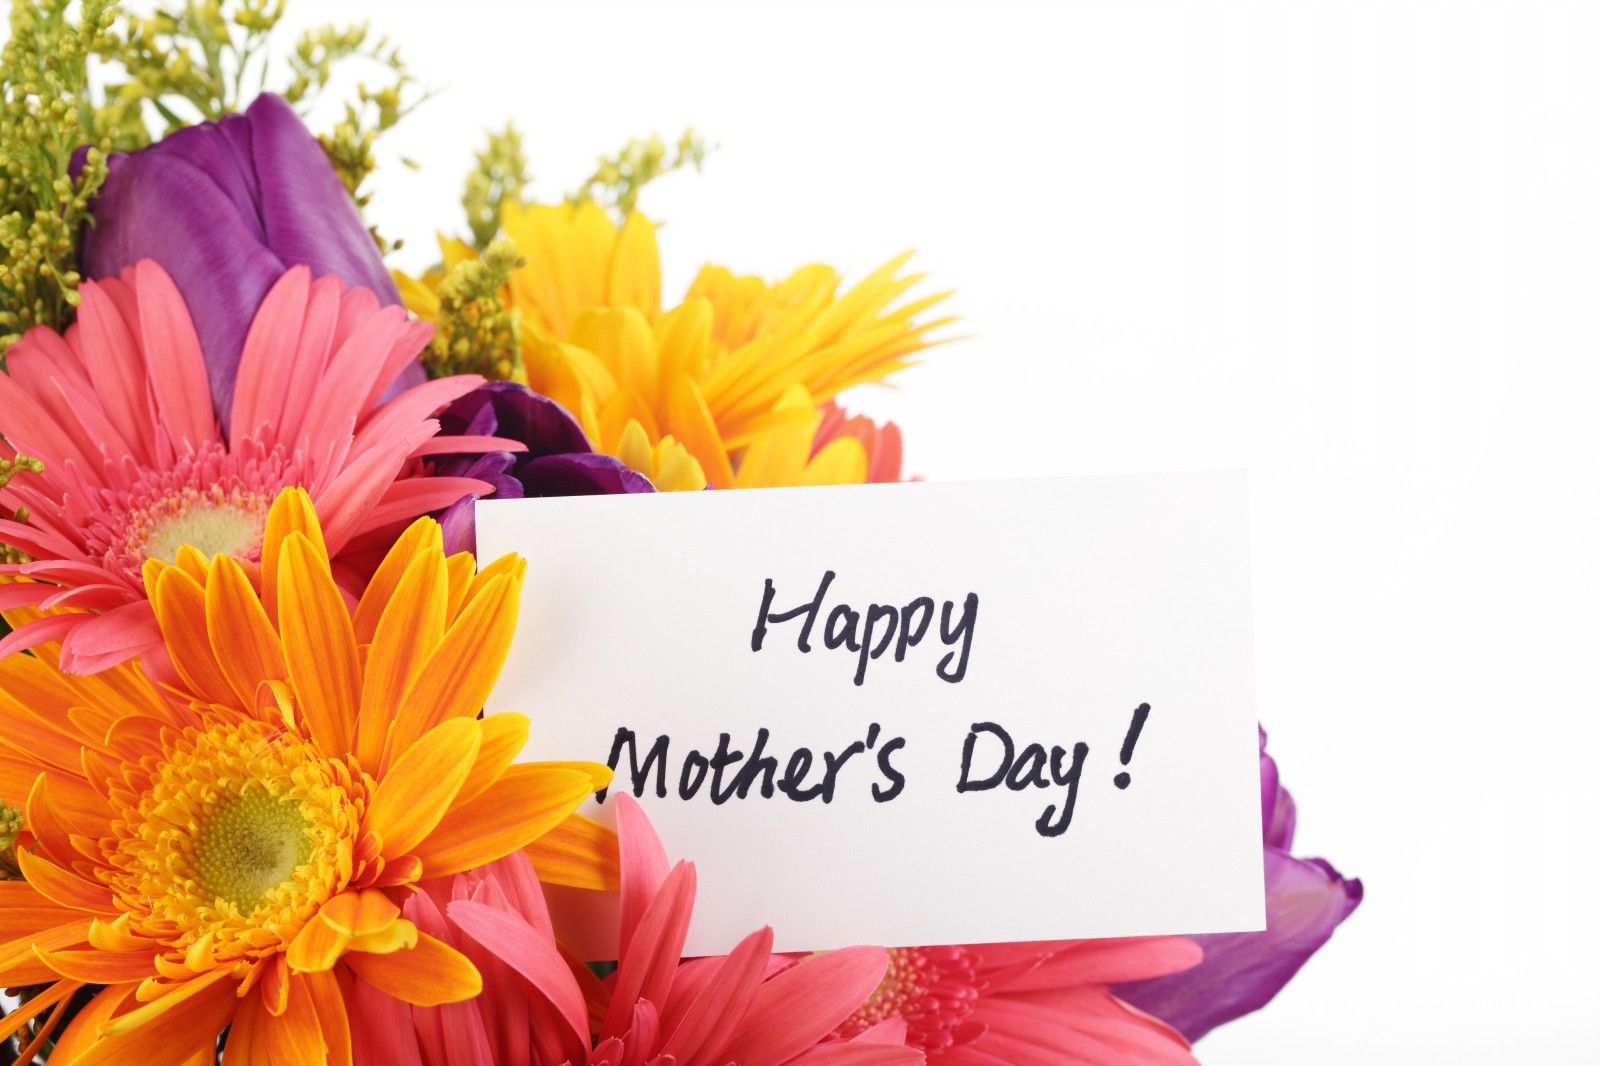 Happy Mother's Day Wallpaper HDto5animations.com